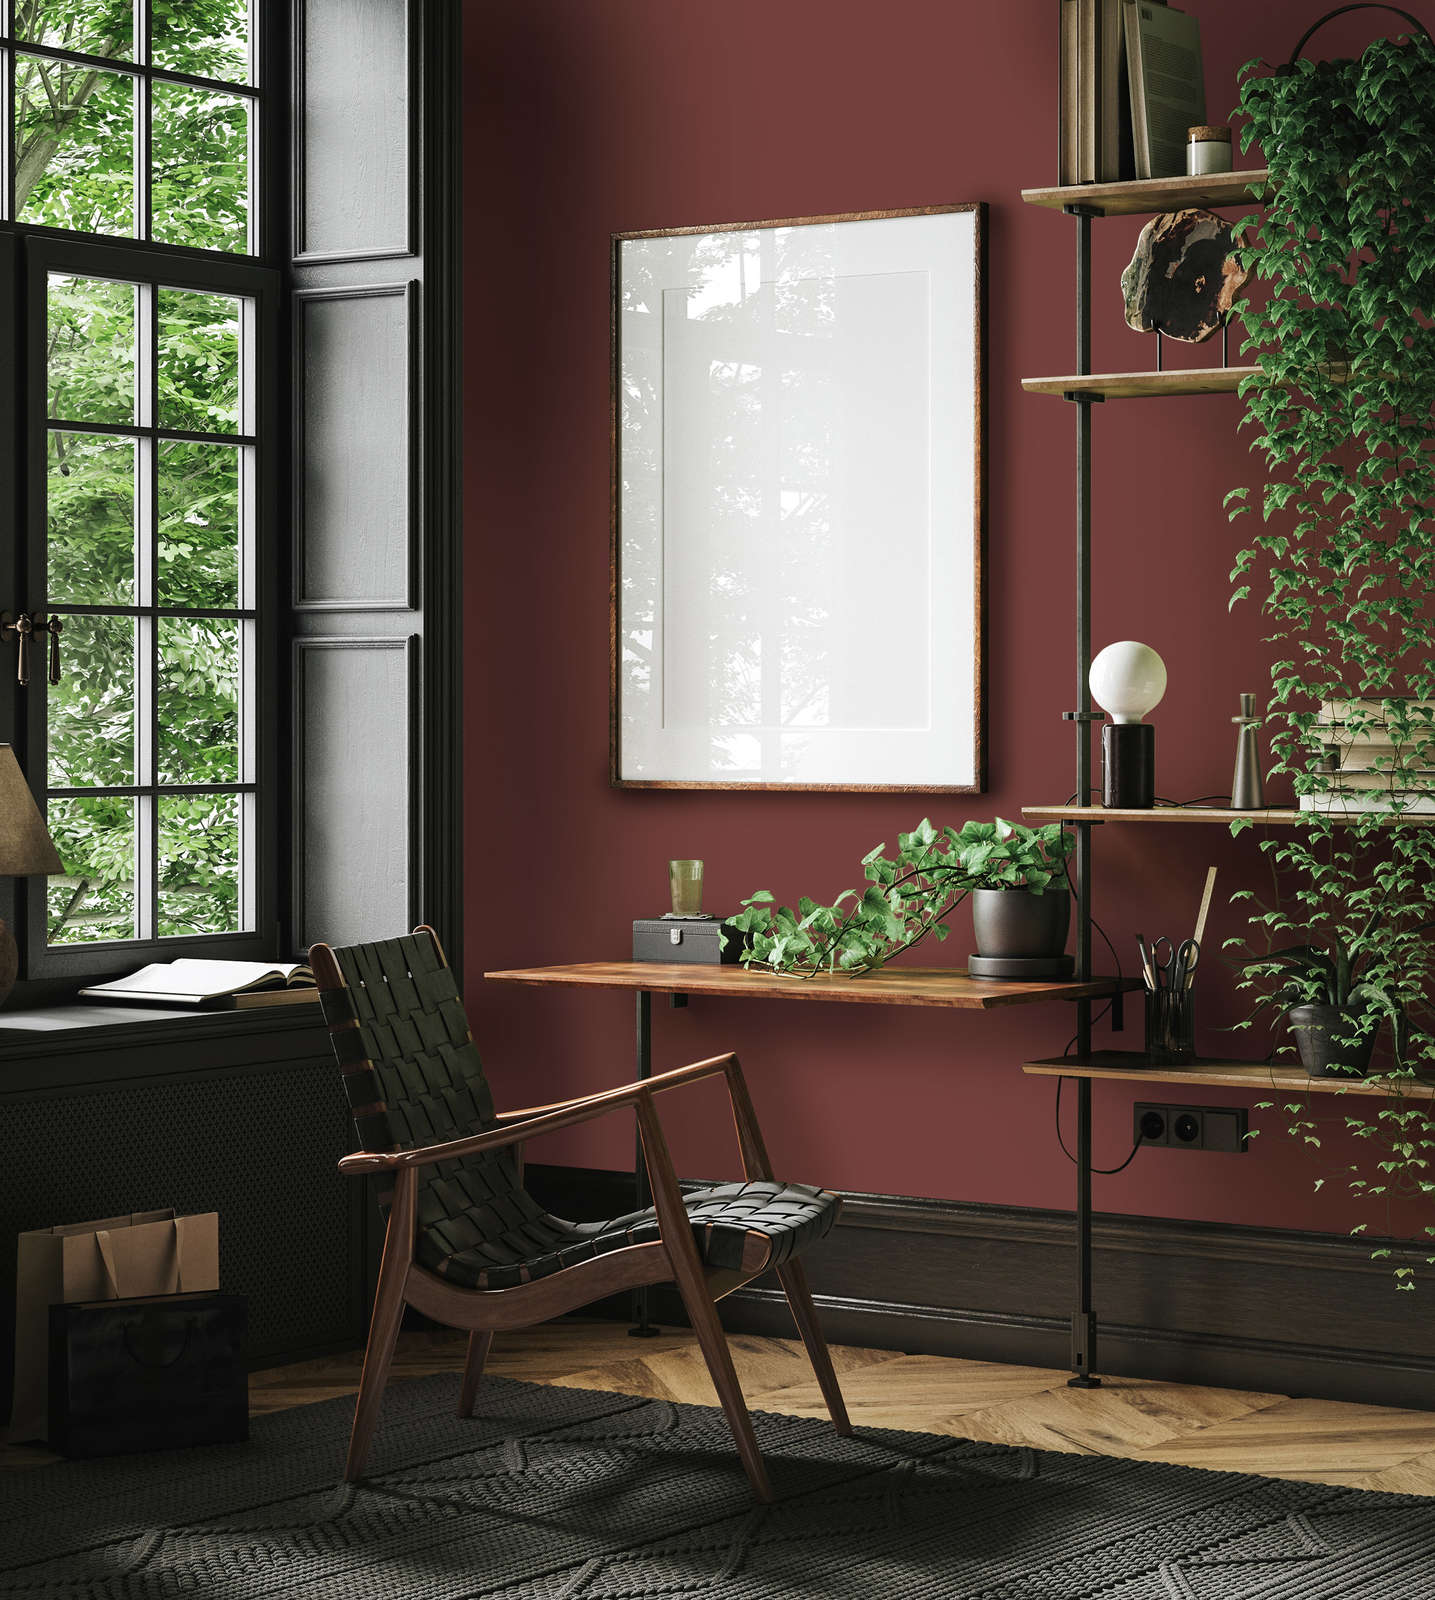             Premium Wall Paint noble chestnut red »Luxury Lipstick« NW1007 – 2.5 litre
        